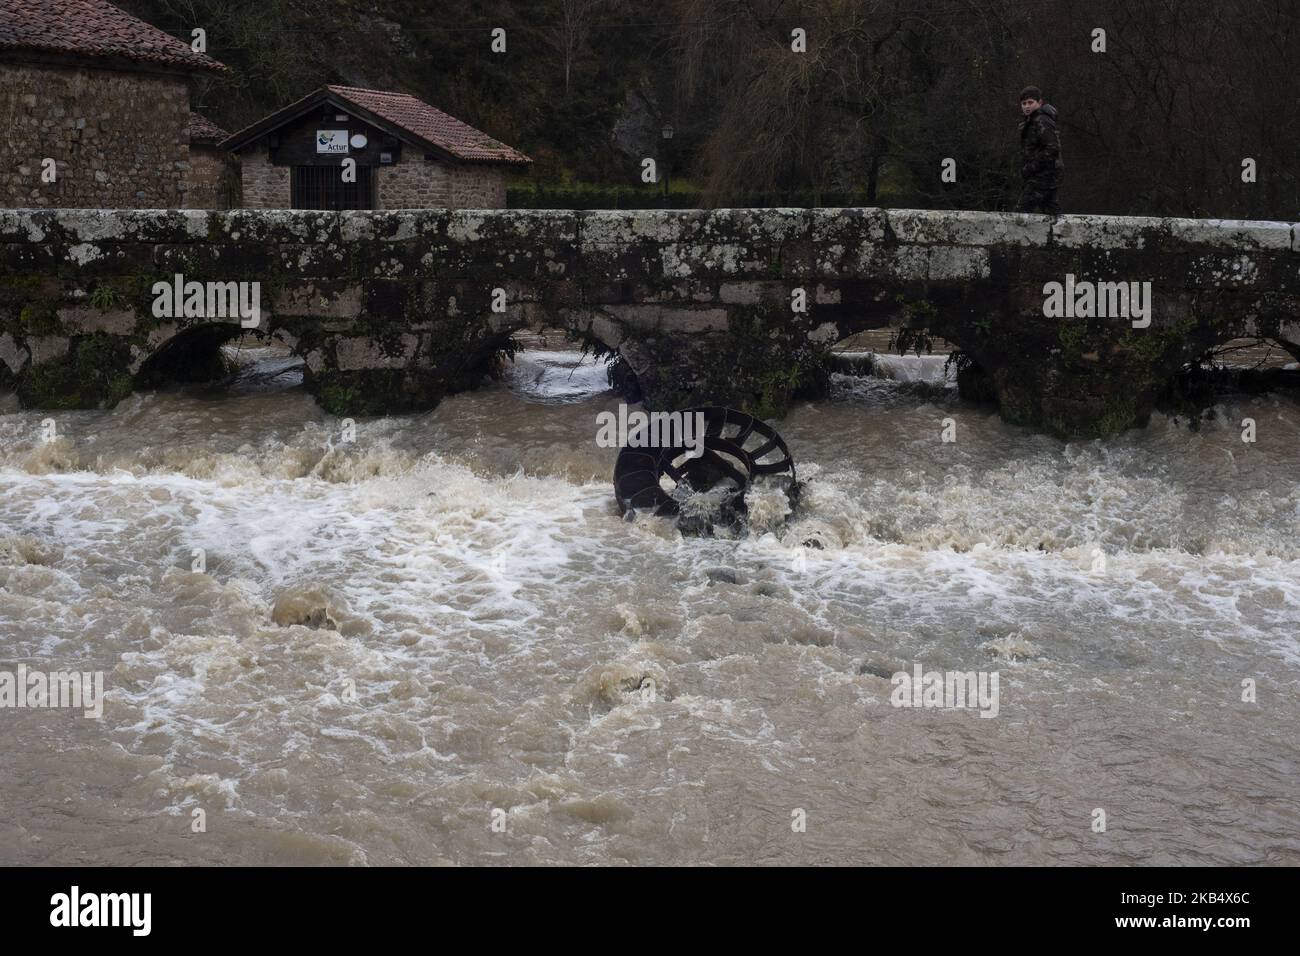 (1/25/2019) A boy passes by the bridge over the river that still fell very grown in the town of Ruente (Cantabria), Spain, on 25 January 2019 due to the amount of rain fallen by the storm. A total of 61 municipalities, most of them located in the riverbank areas of the community of Cantabria have been affected by flooding caused by heavy rains in recent hours, which have generated a situation 'very complicated' , especially in the basins of the rivers Saja and Besaya as well as in Caranceja or Virgen de la Peña.This forced to move to the area a unit of the UME (Military Emergency Unit) compose Stock Photo